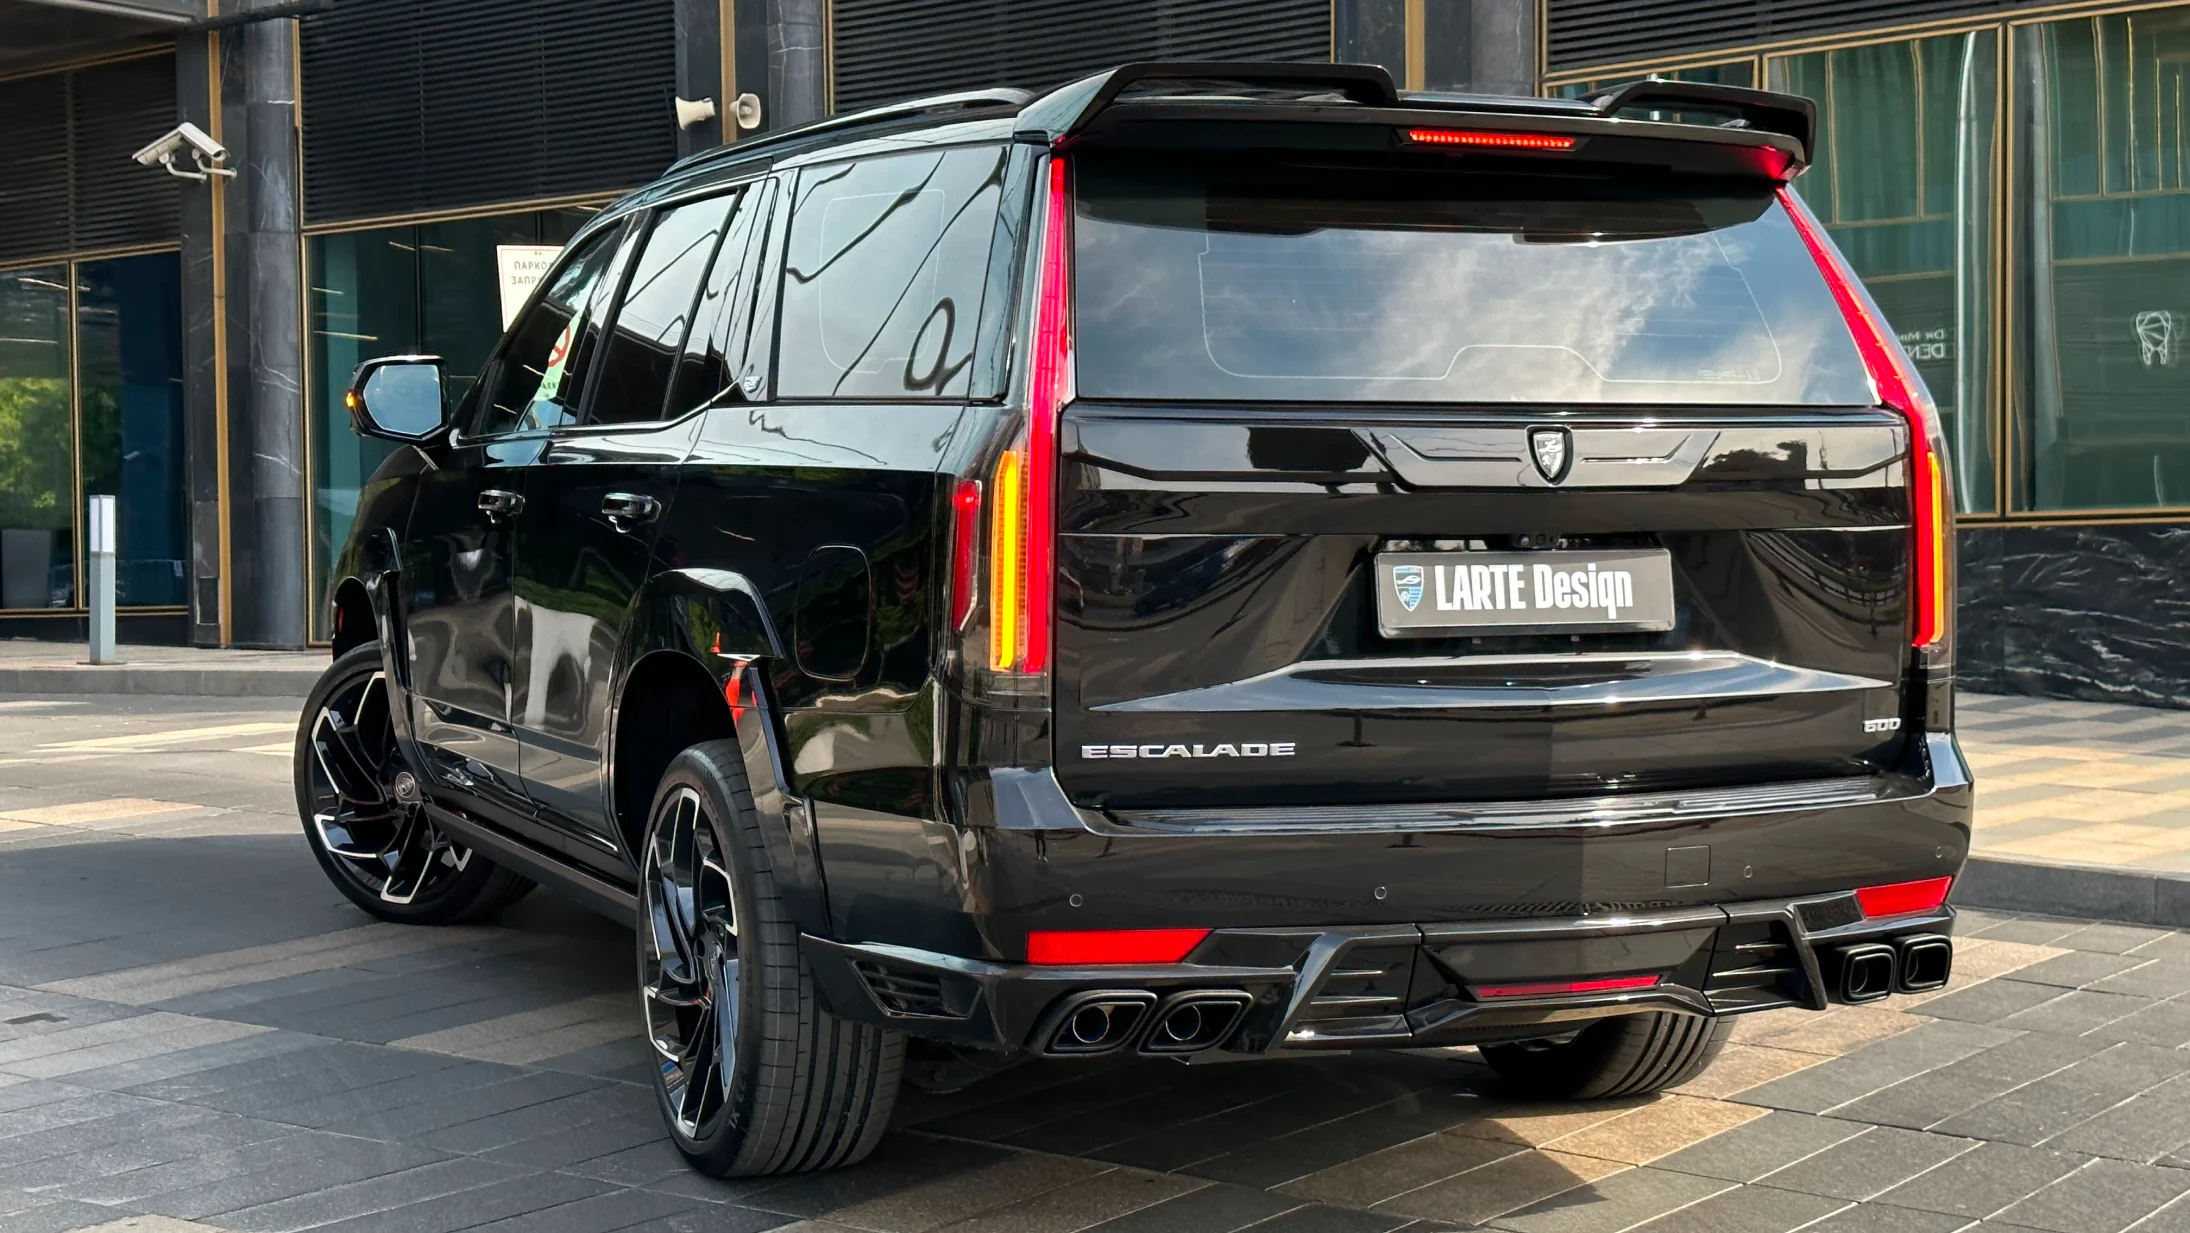 Rear angle view on a Cadillac Escalade with a body kit giving the car a custom appearance